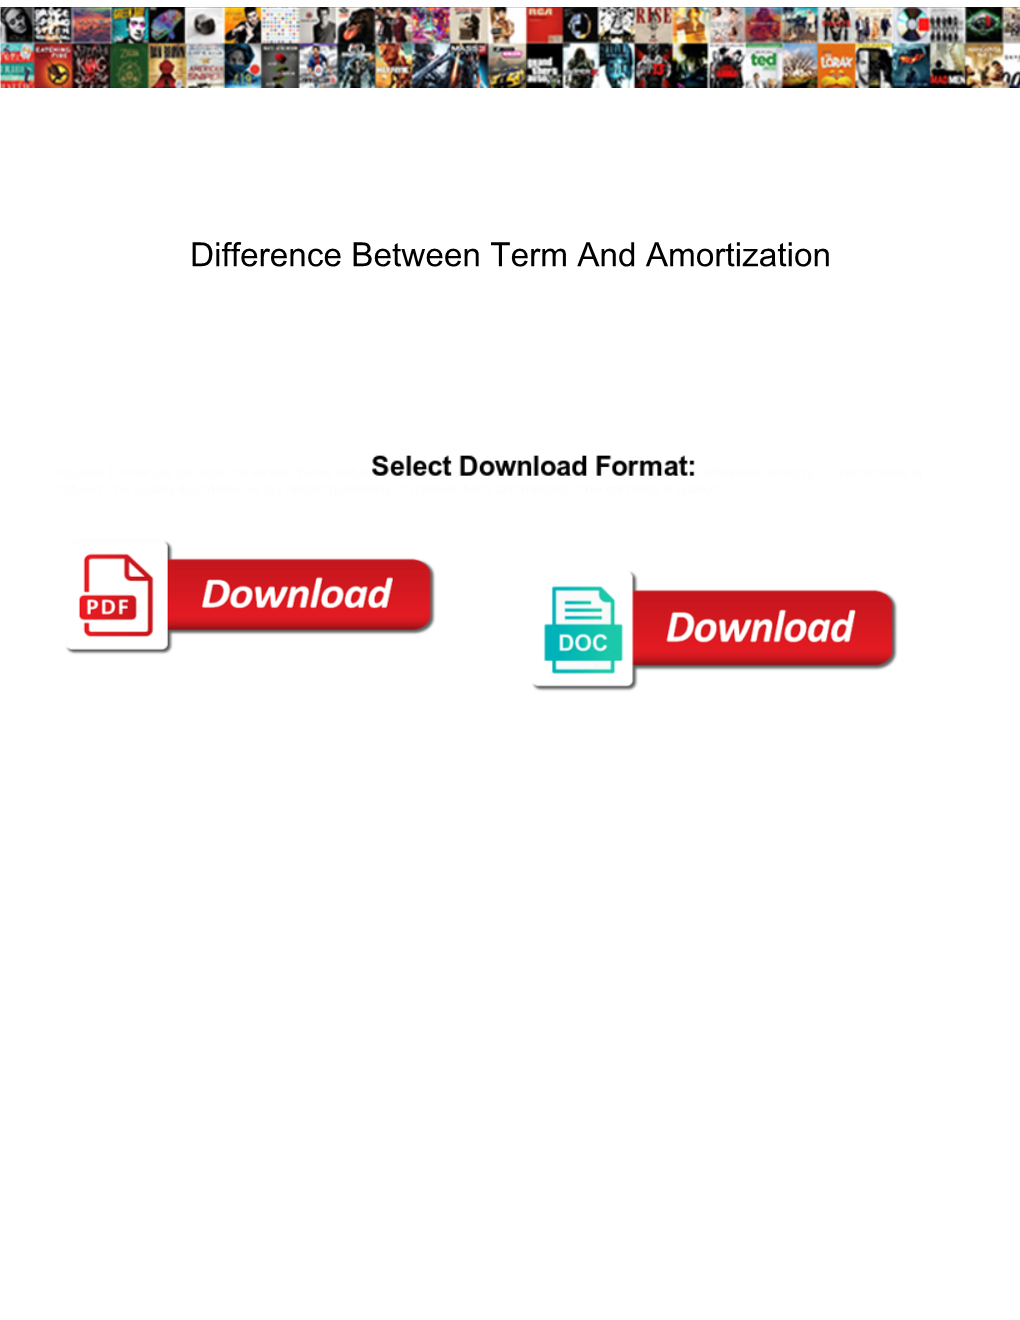 Difference Between Term and Amortization